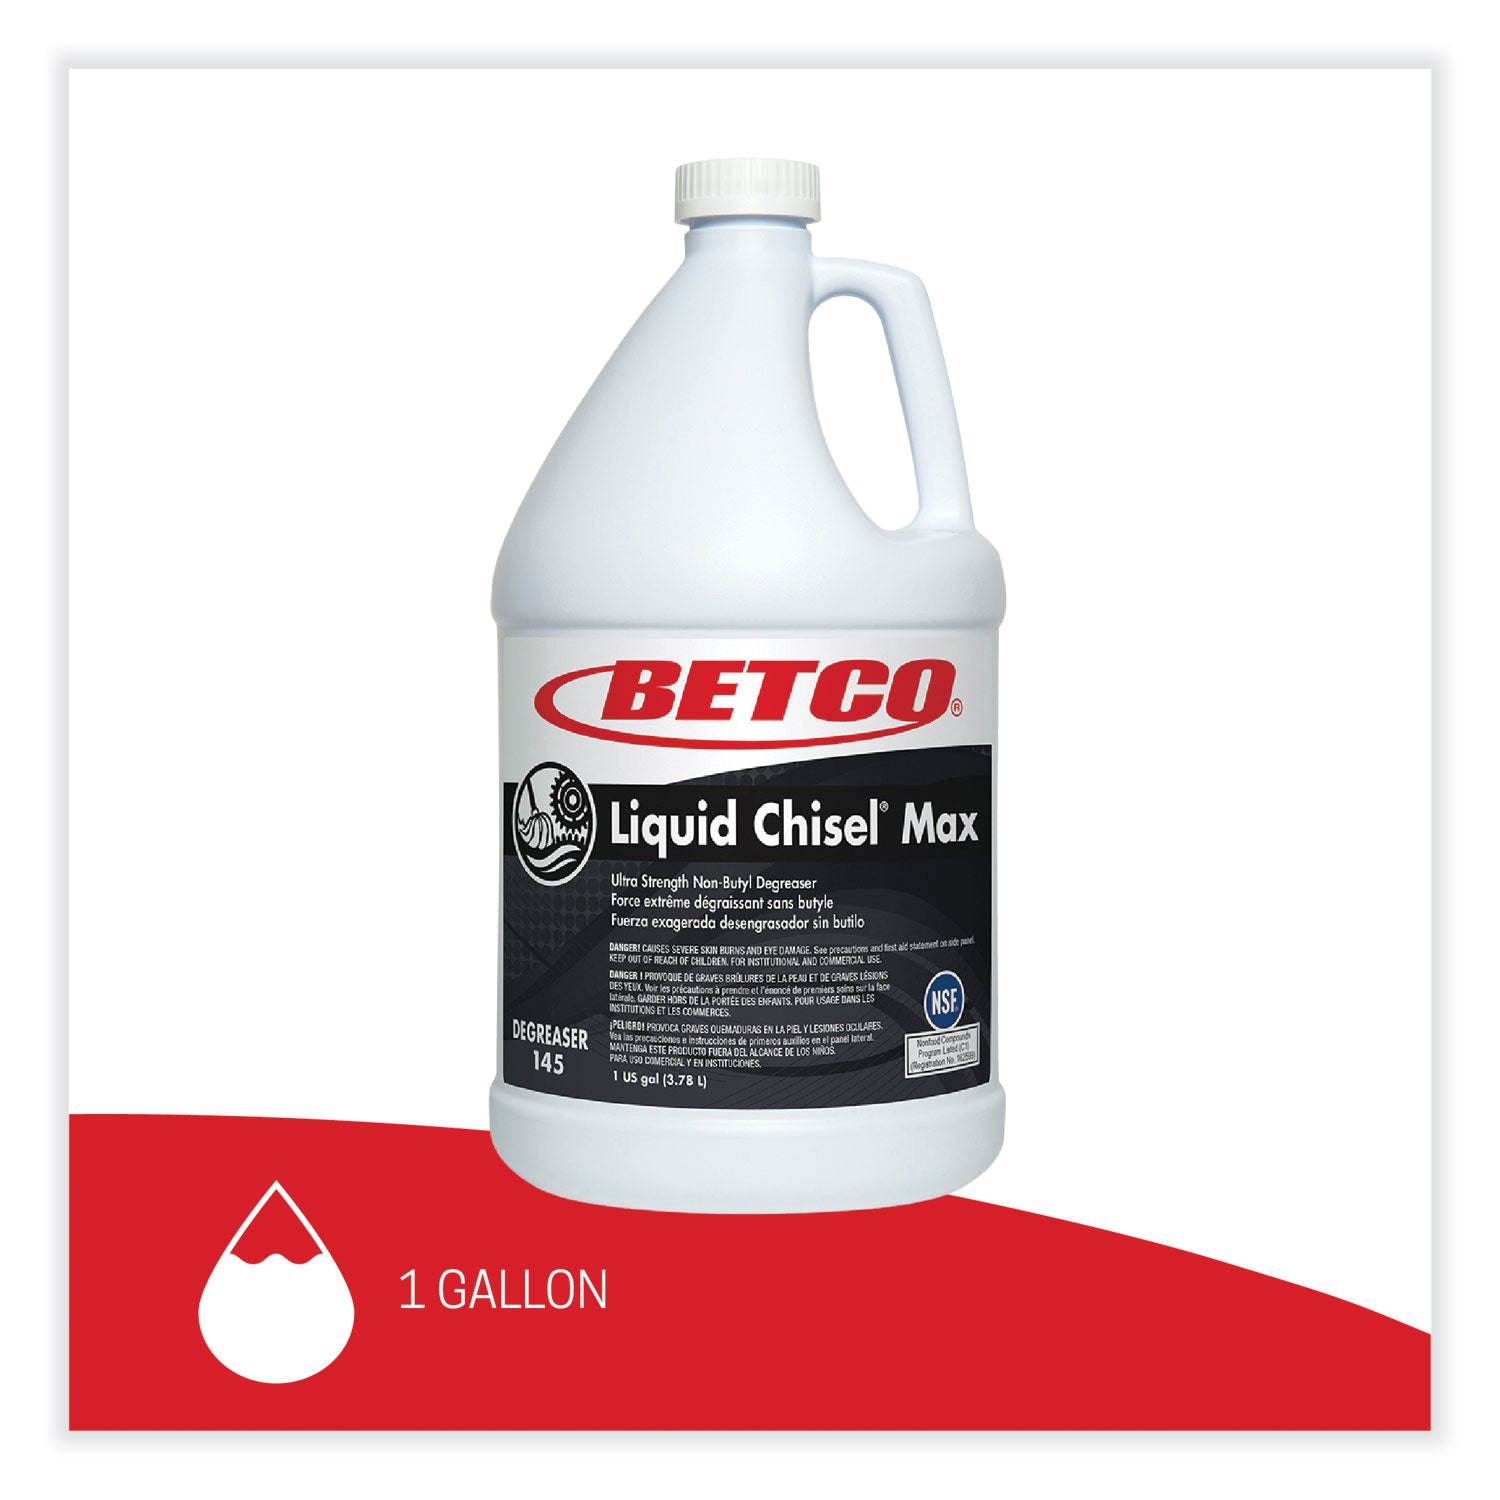 liquid-chisel-max-non-butyl-degreaser-characteristic-scent-1-gal-bottle-4-carton_bet1450400 - 7